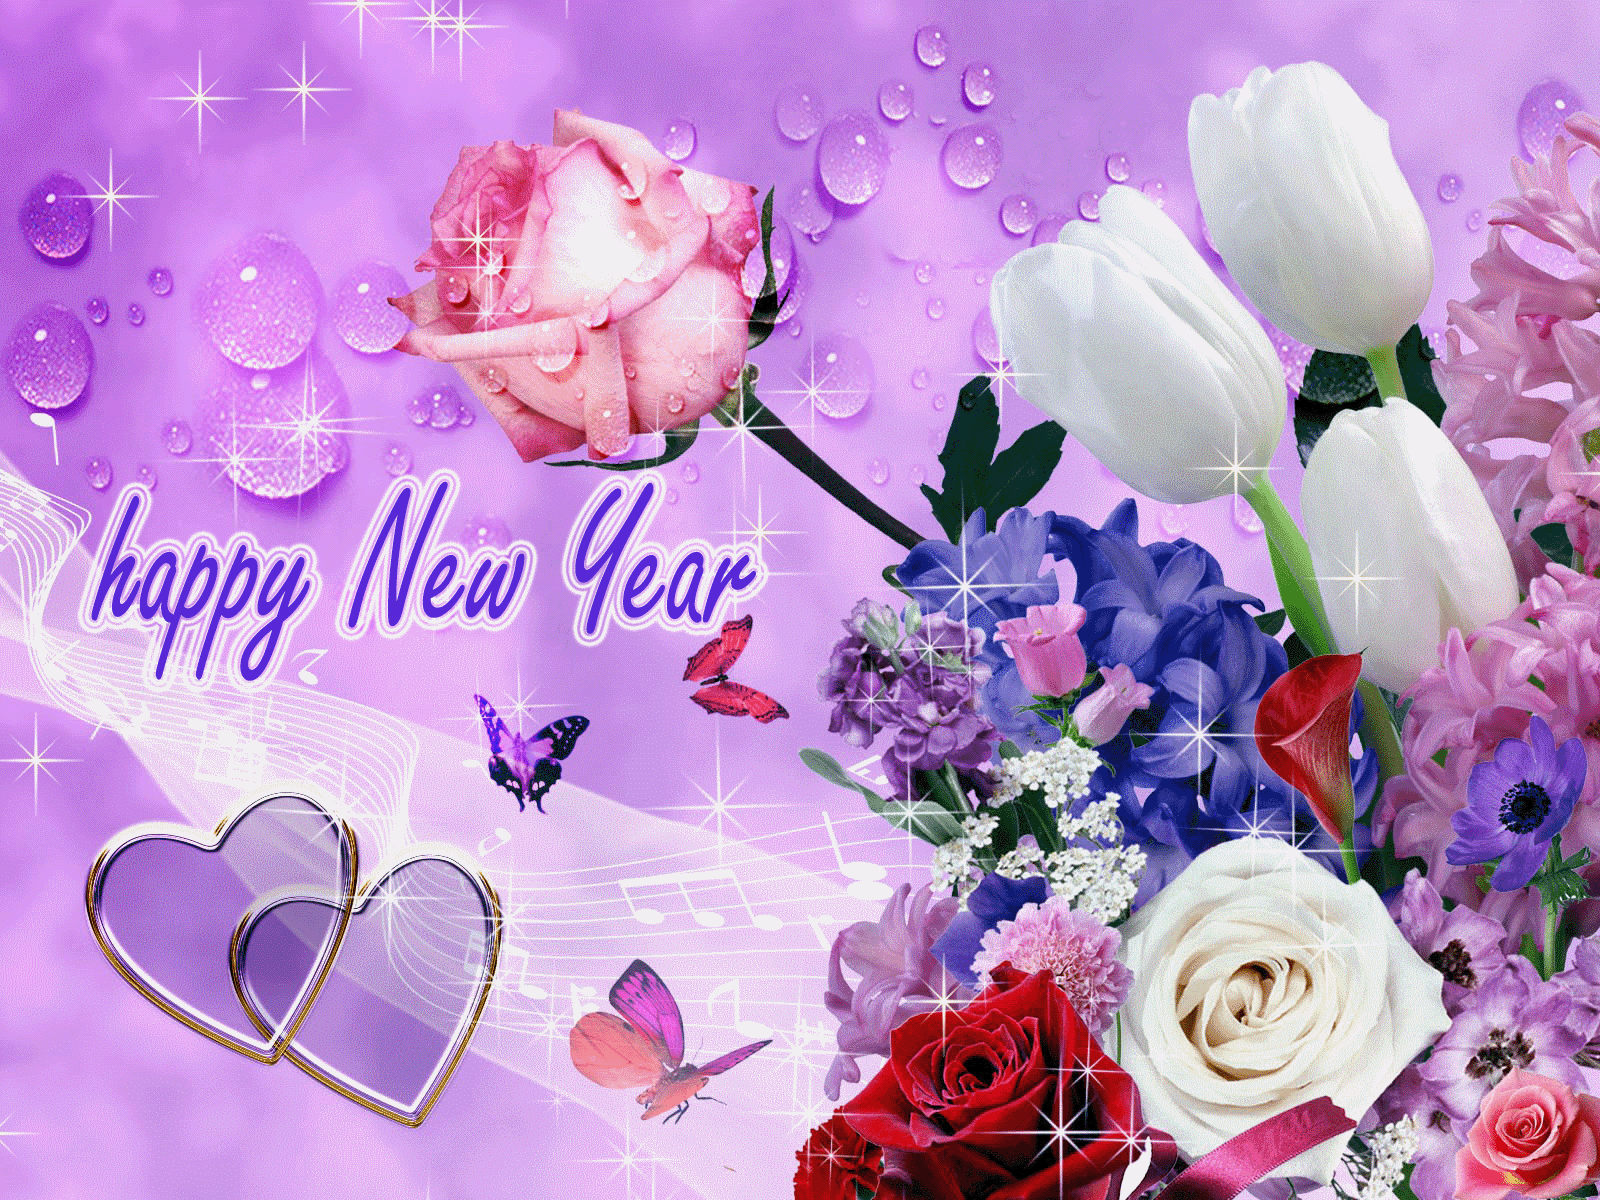 Free download Free Download Happy New Year Wallpapers Happy New Year